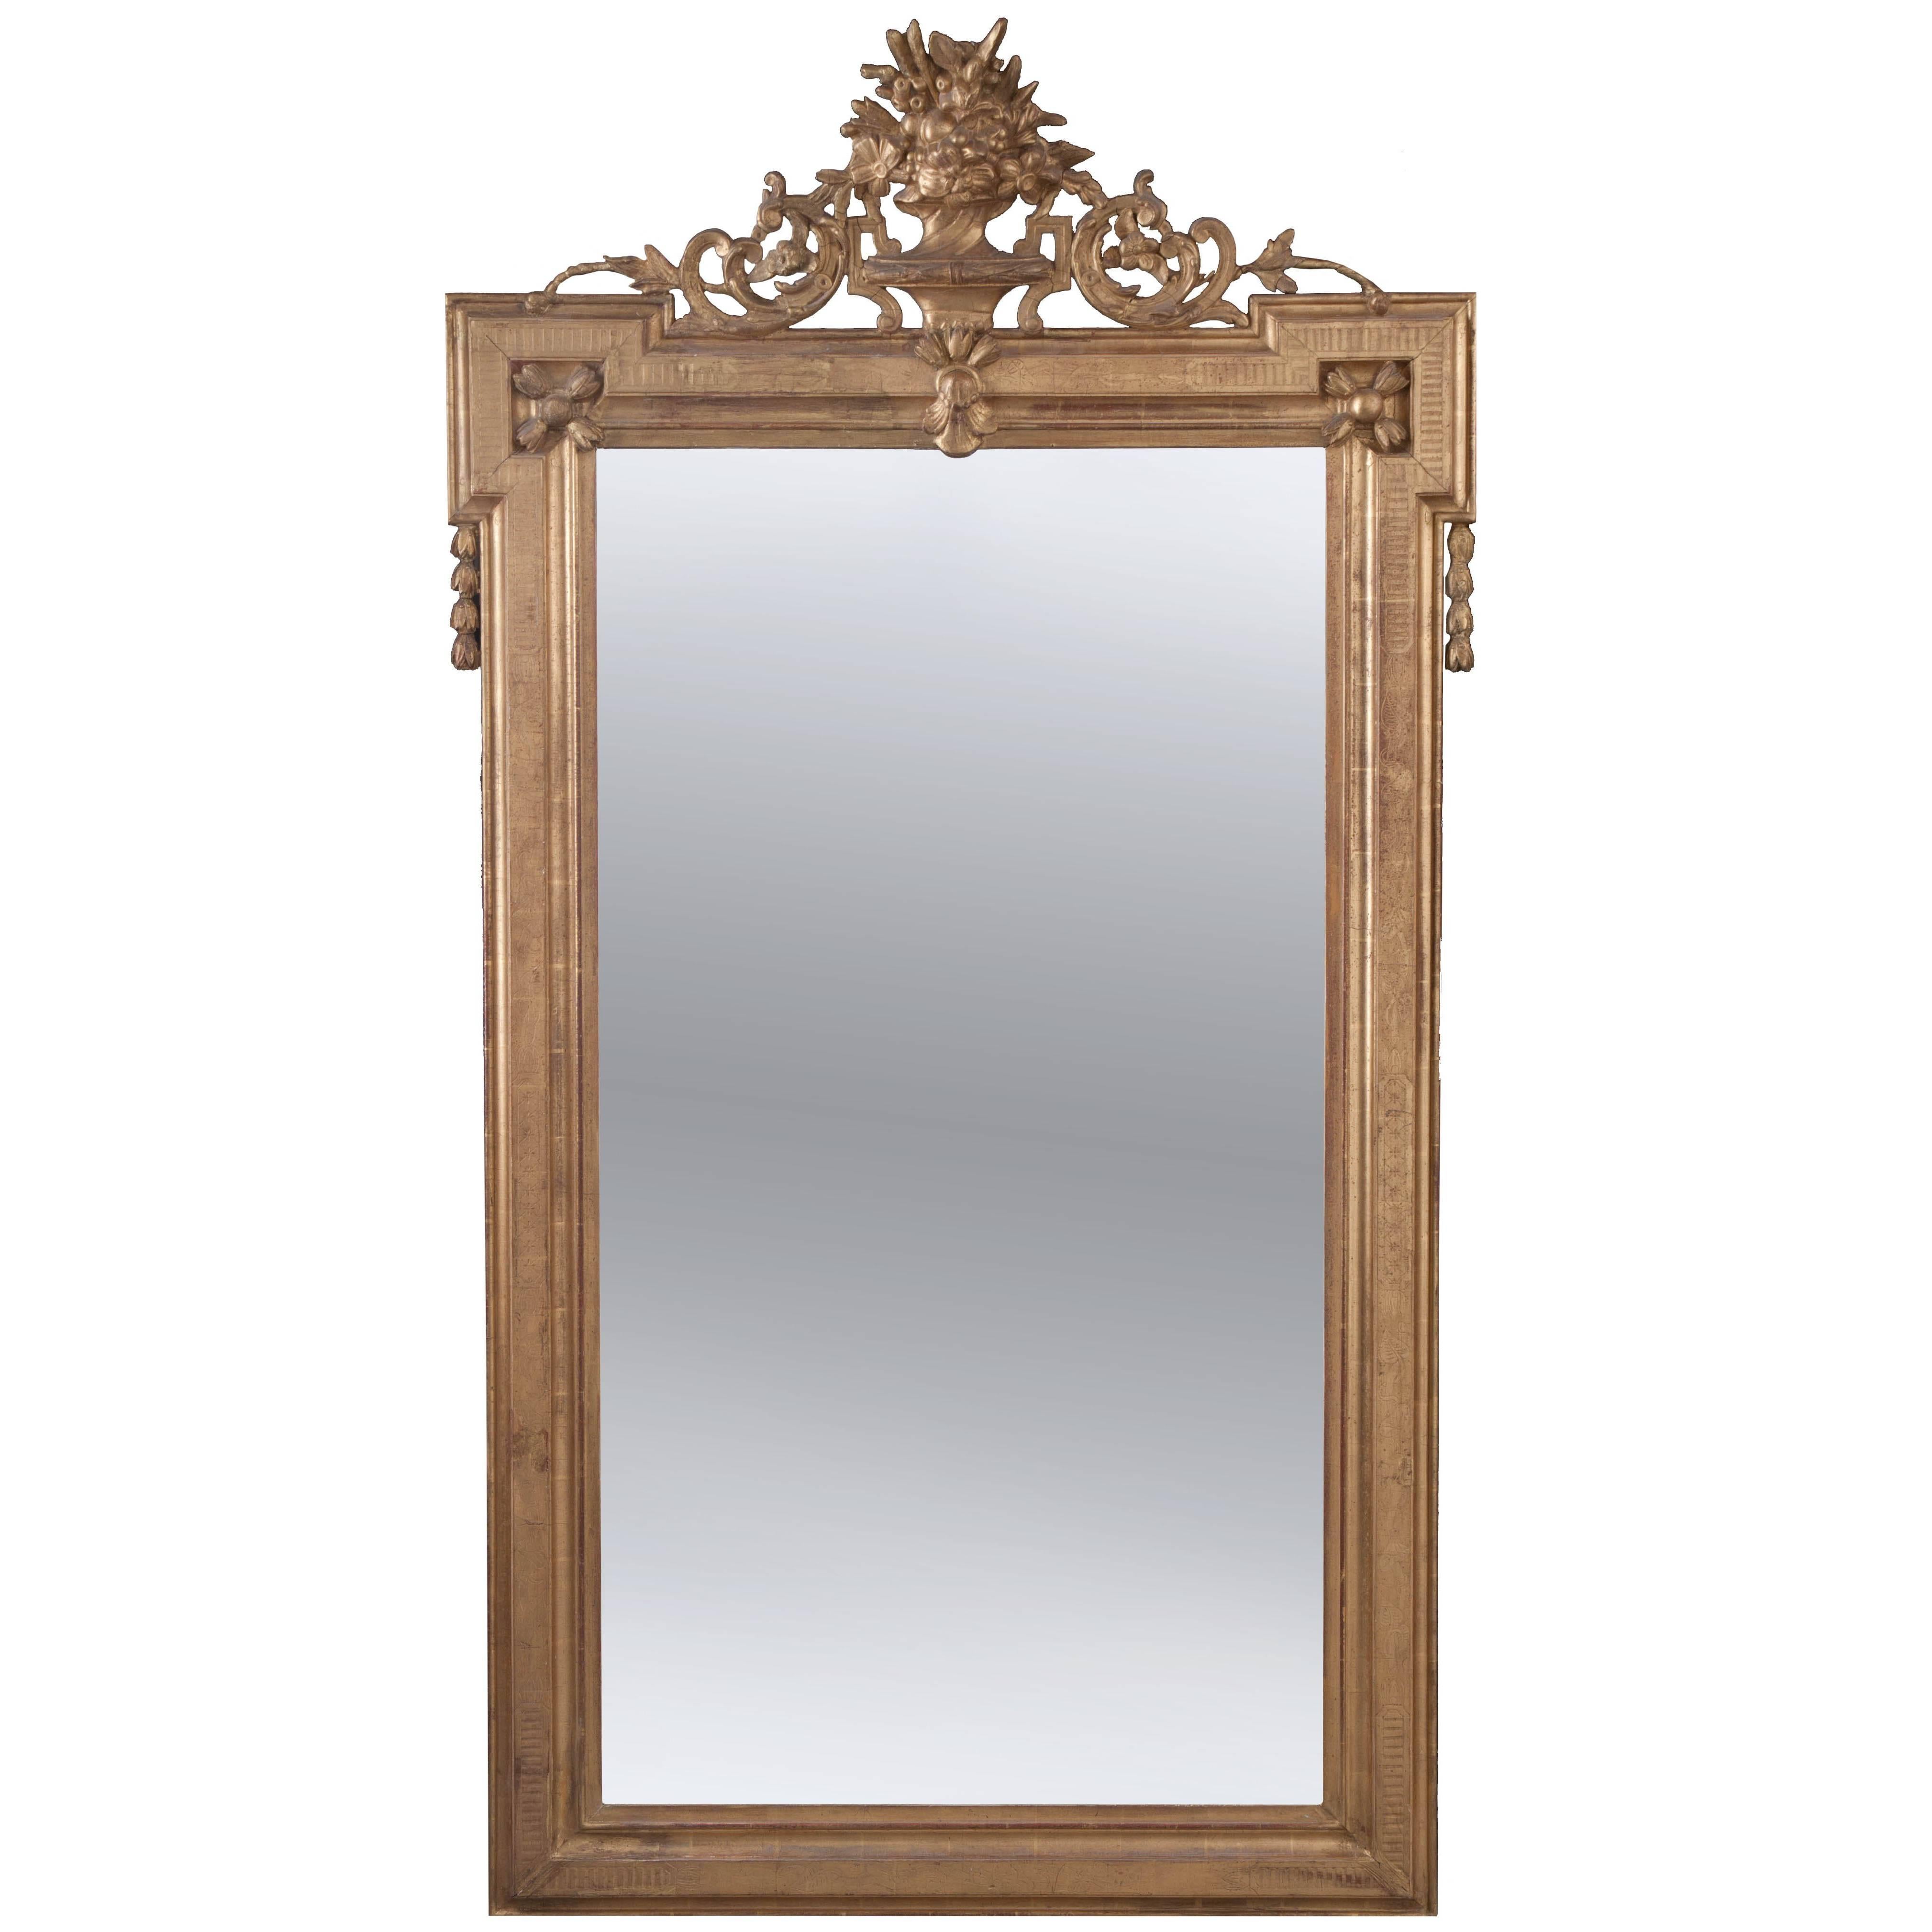 French 19th Century Transitional Gold Gilt Mirror